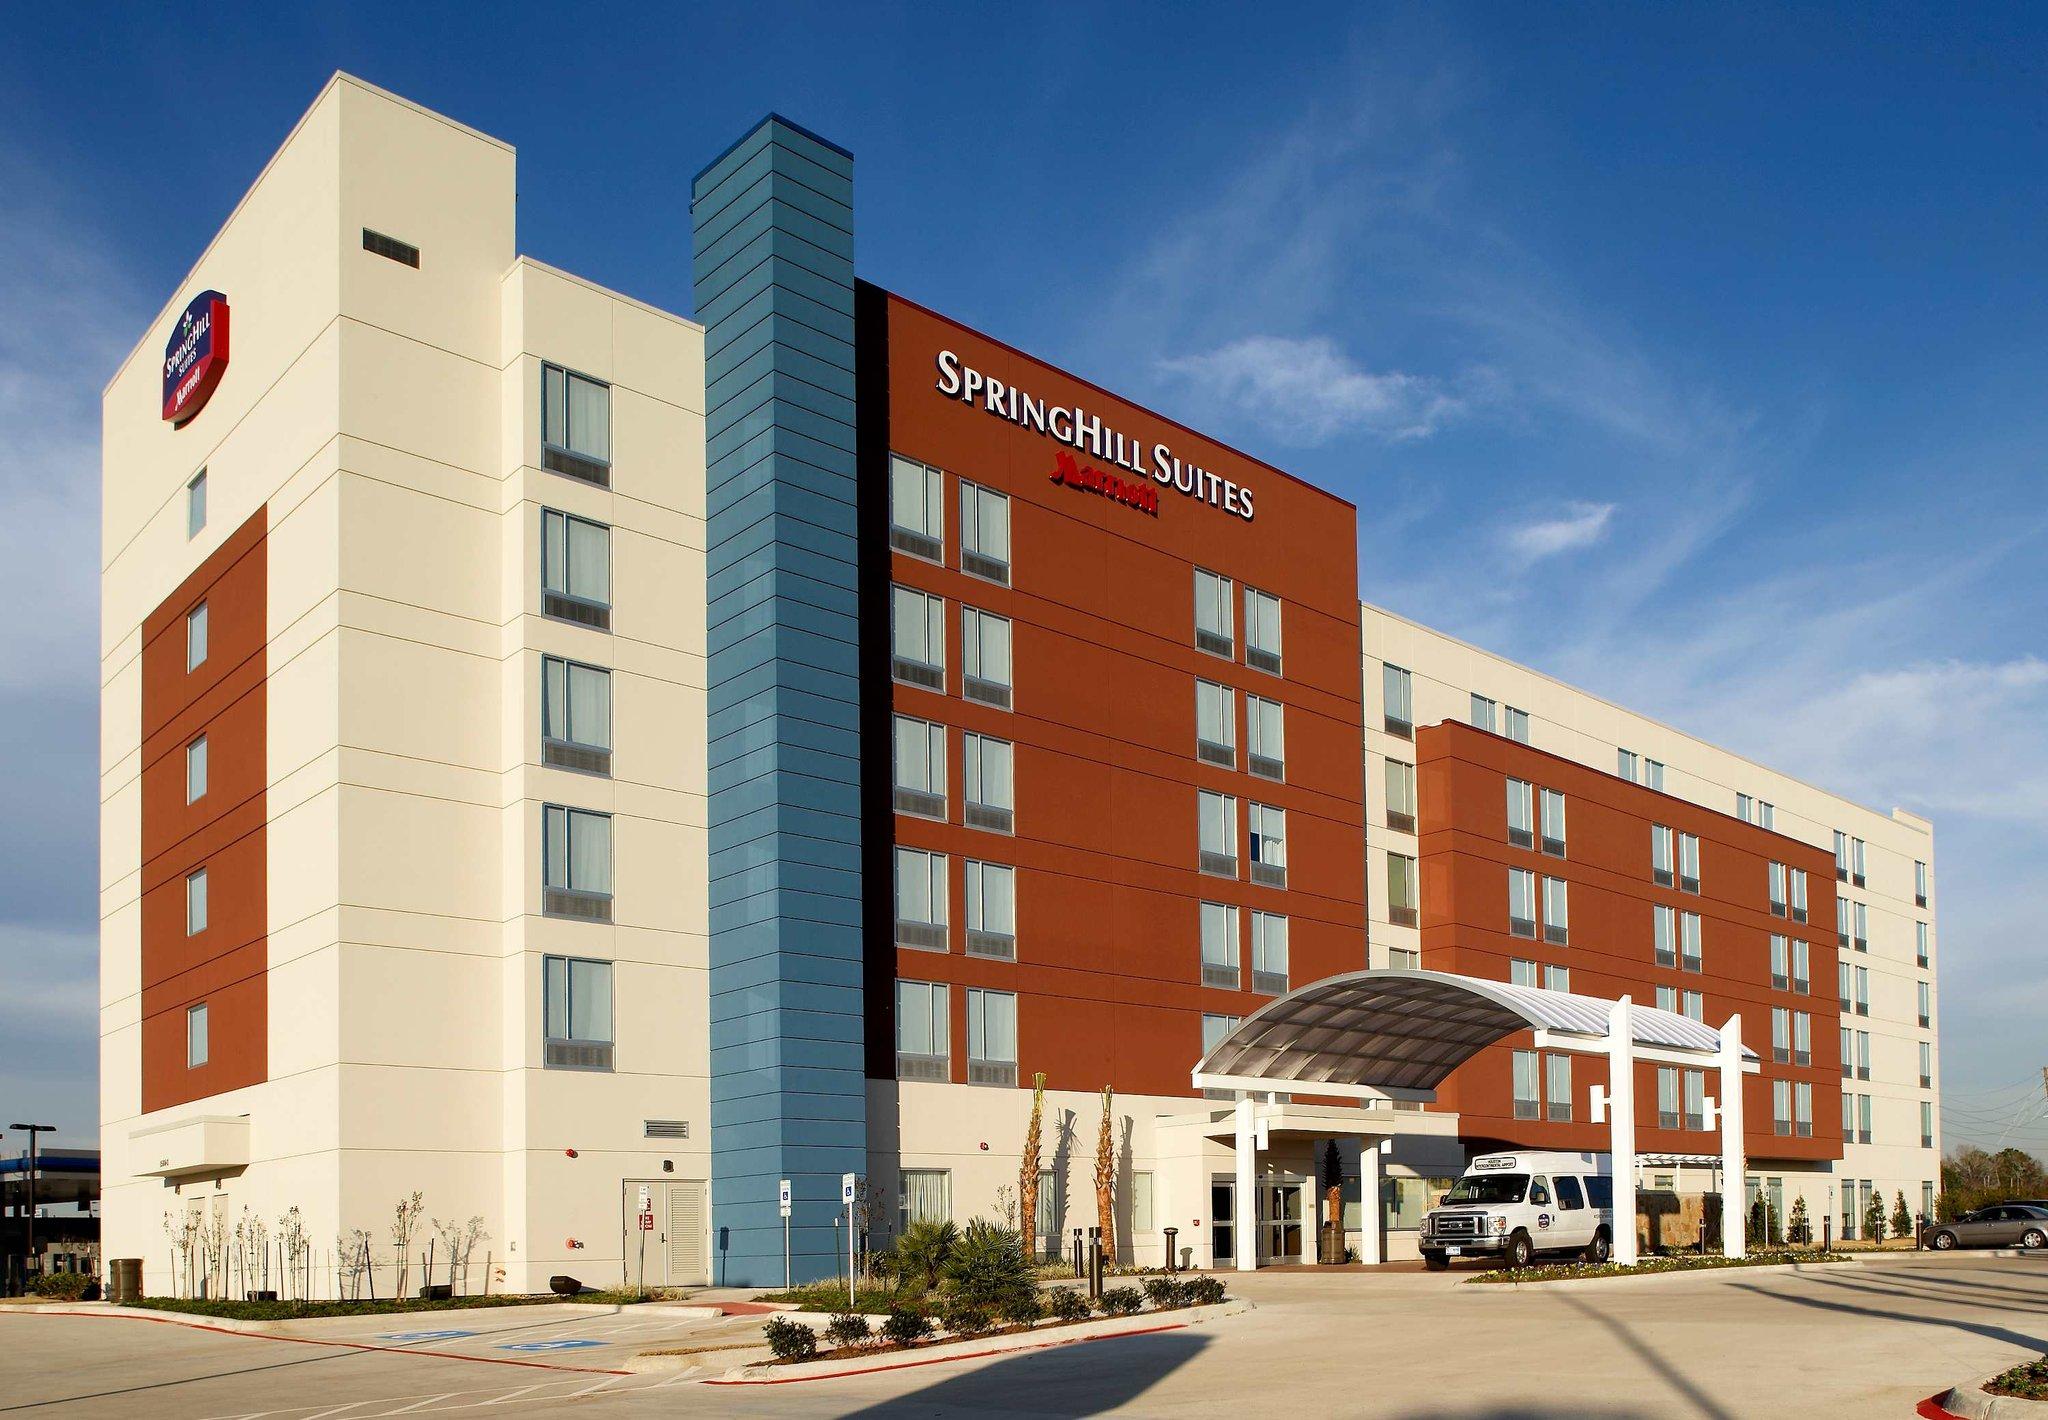 SpringHill Suites Houston Intercontinental Airport image 1